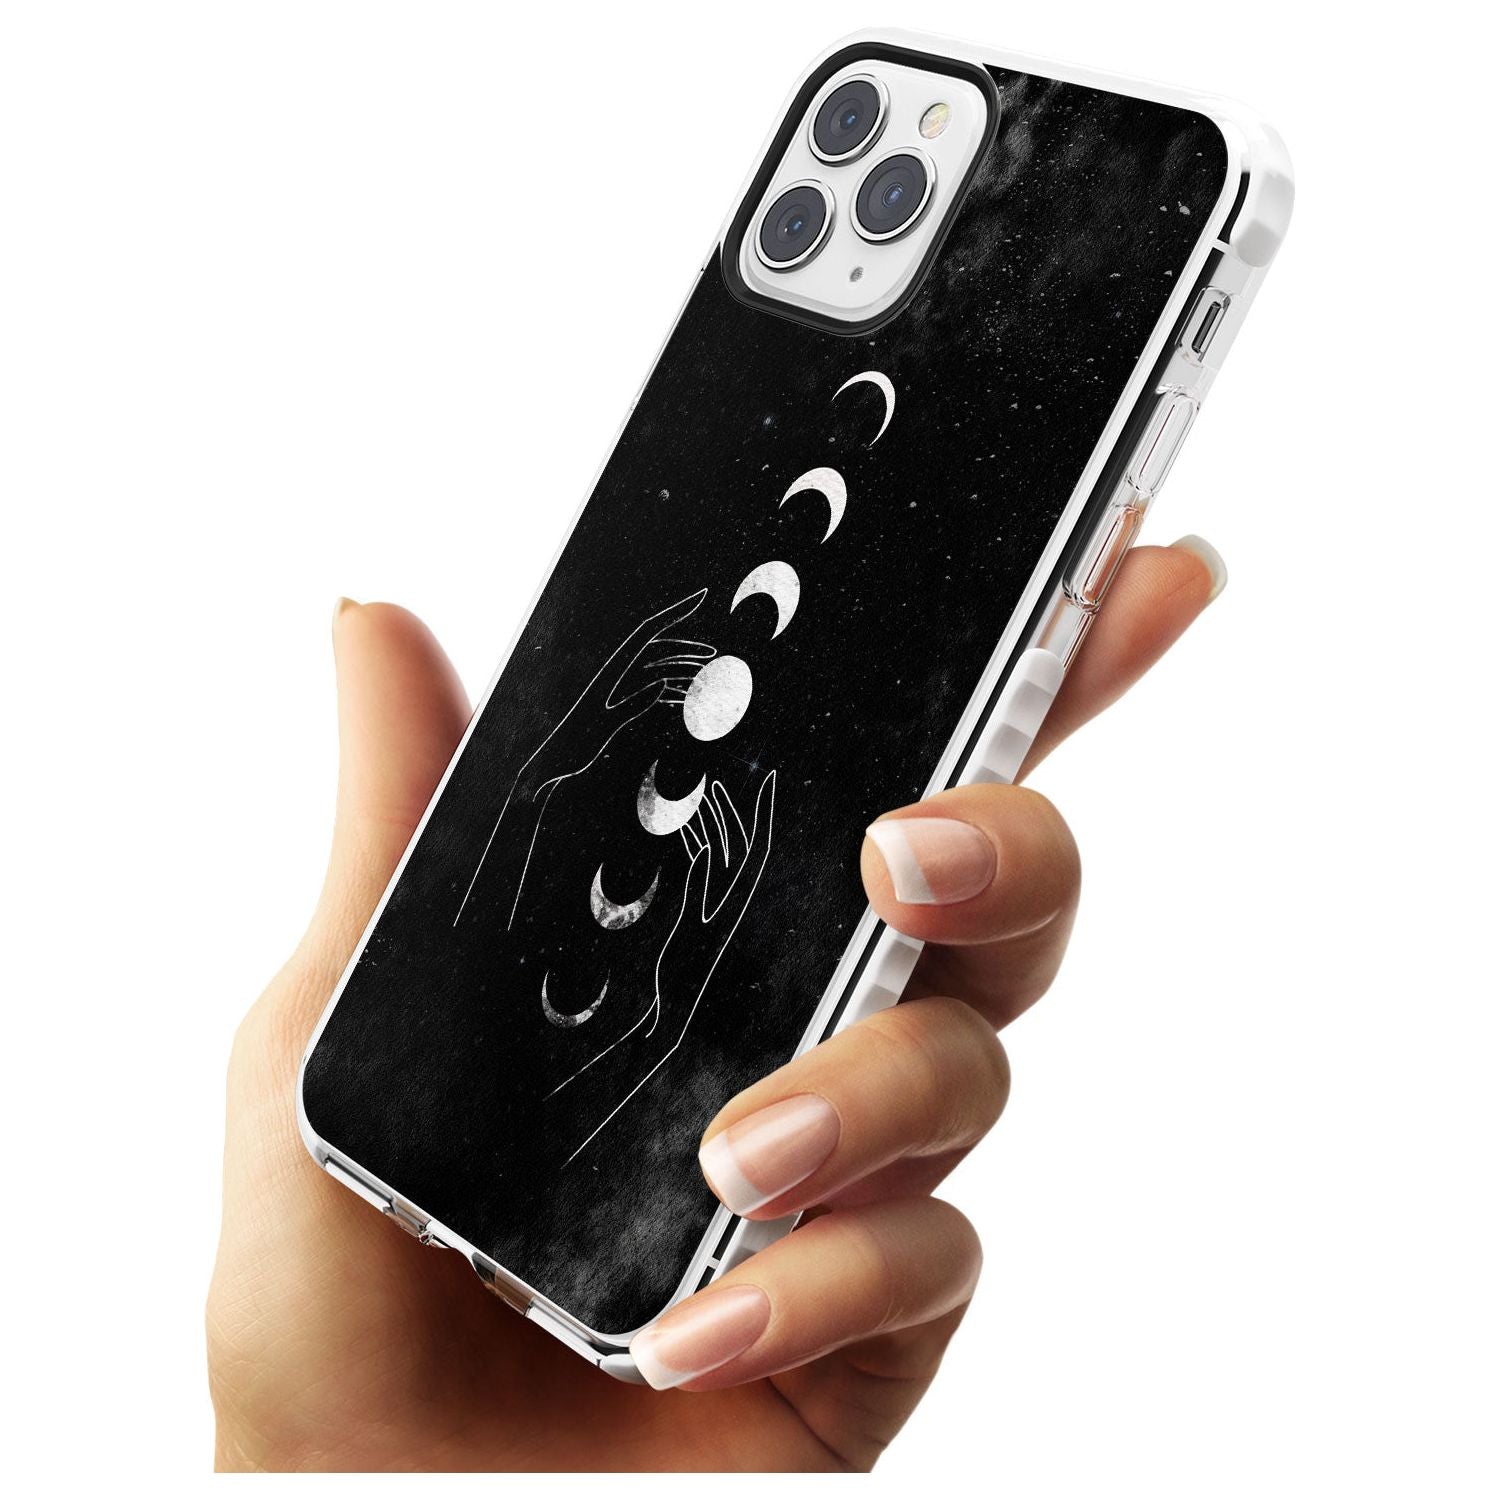 Moon Phases and Hands Impact Phone Case for iPhone 11 Pro Max